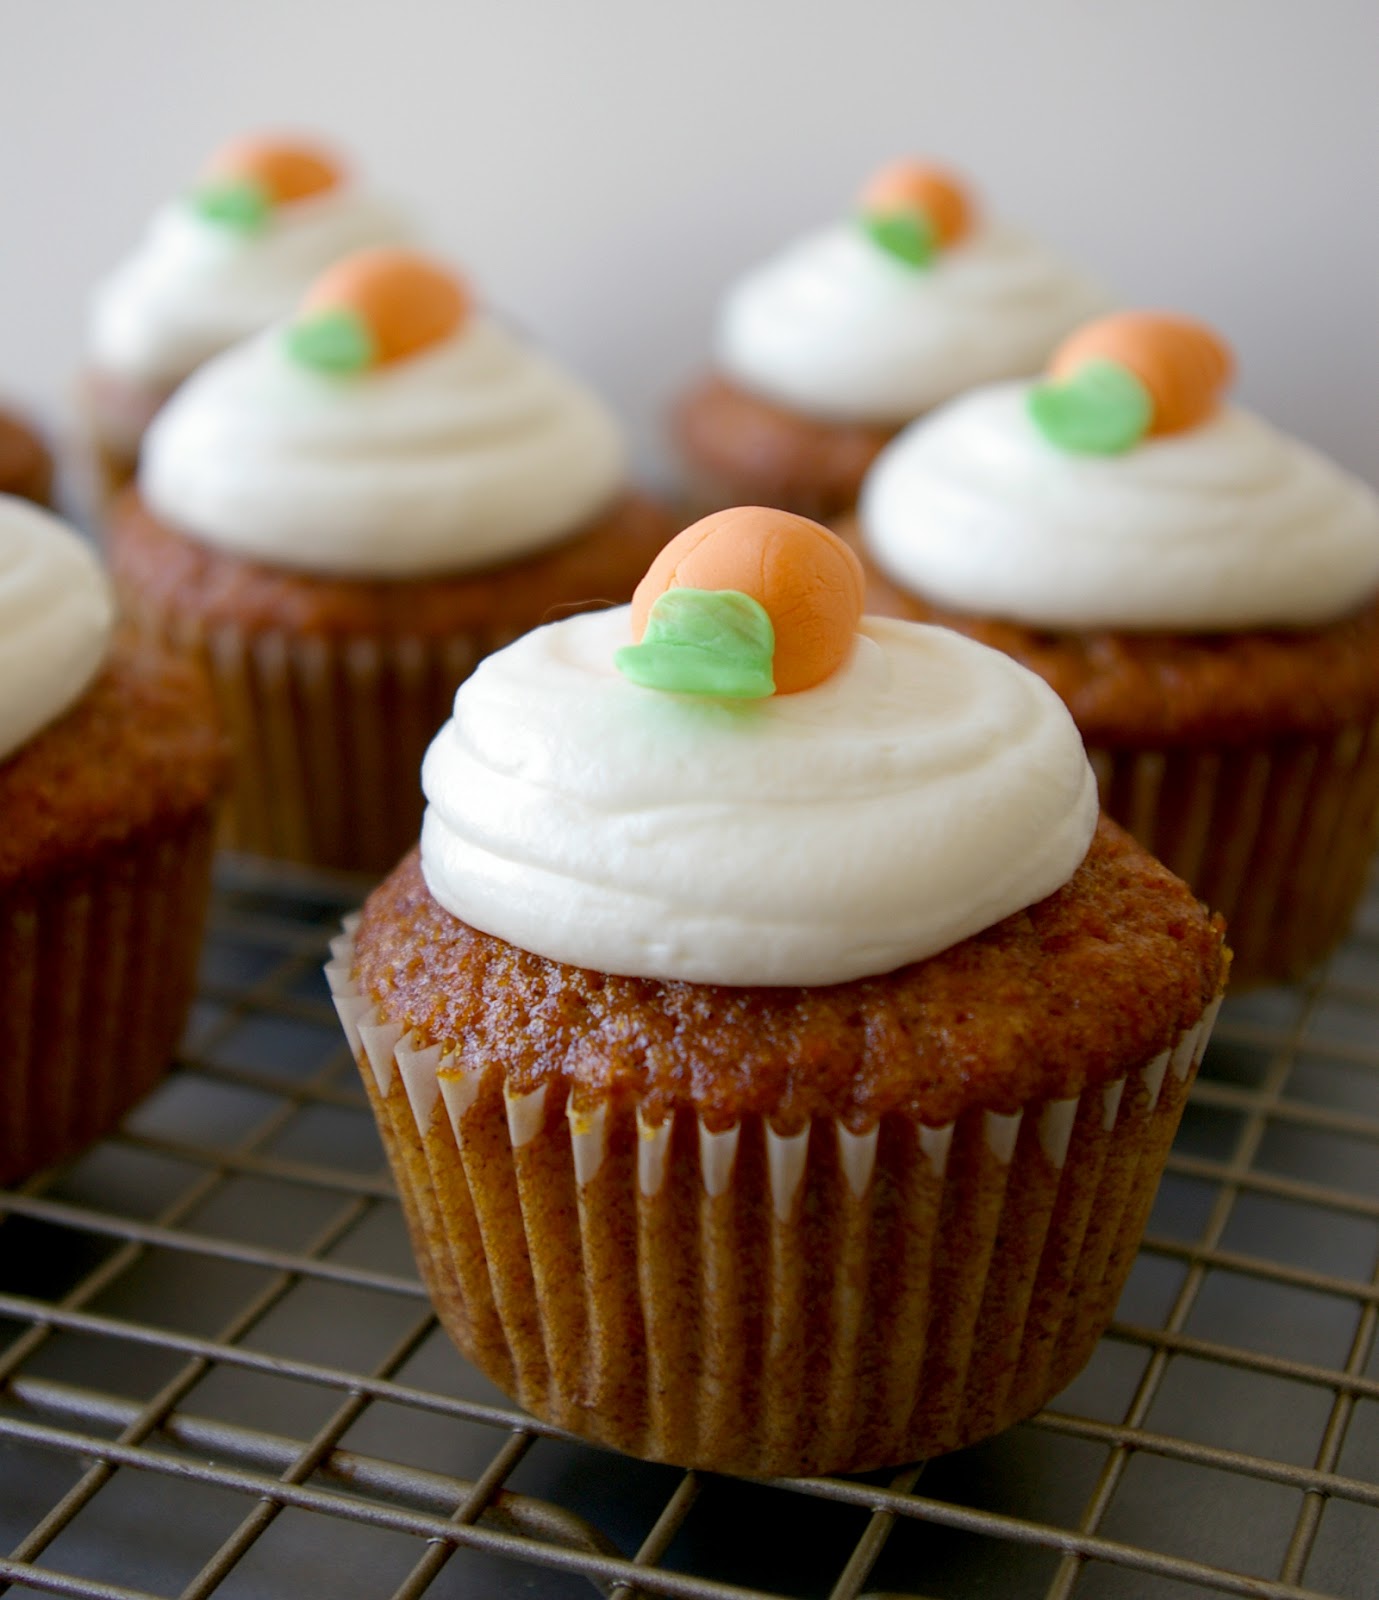  CARROT  CAKE  CUPCAKES  For childrens